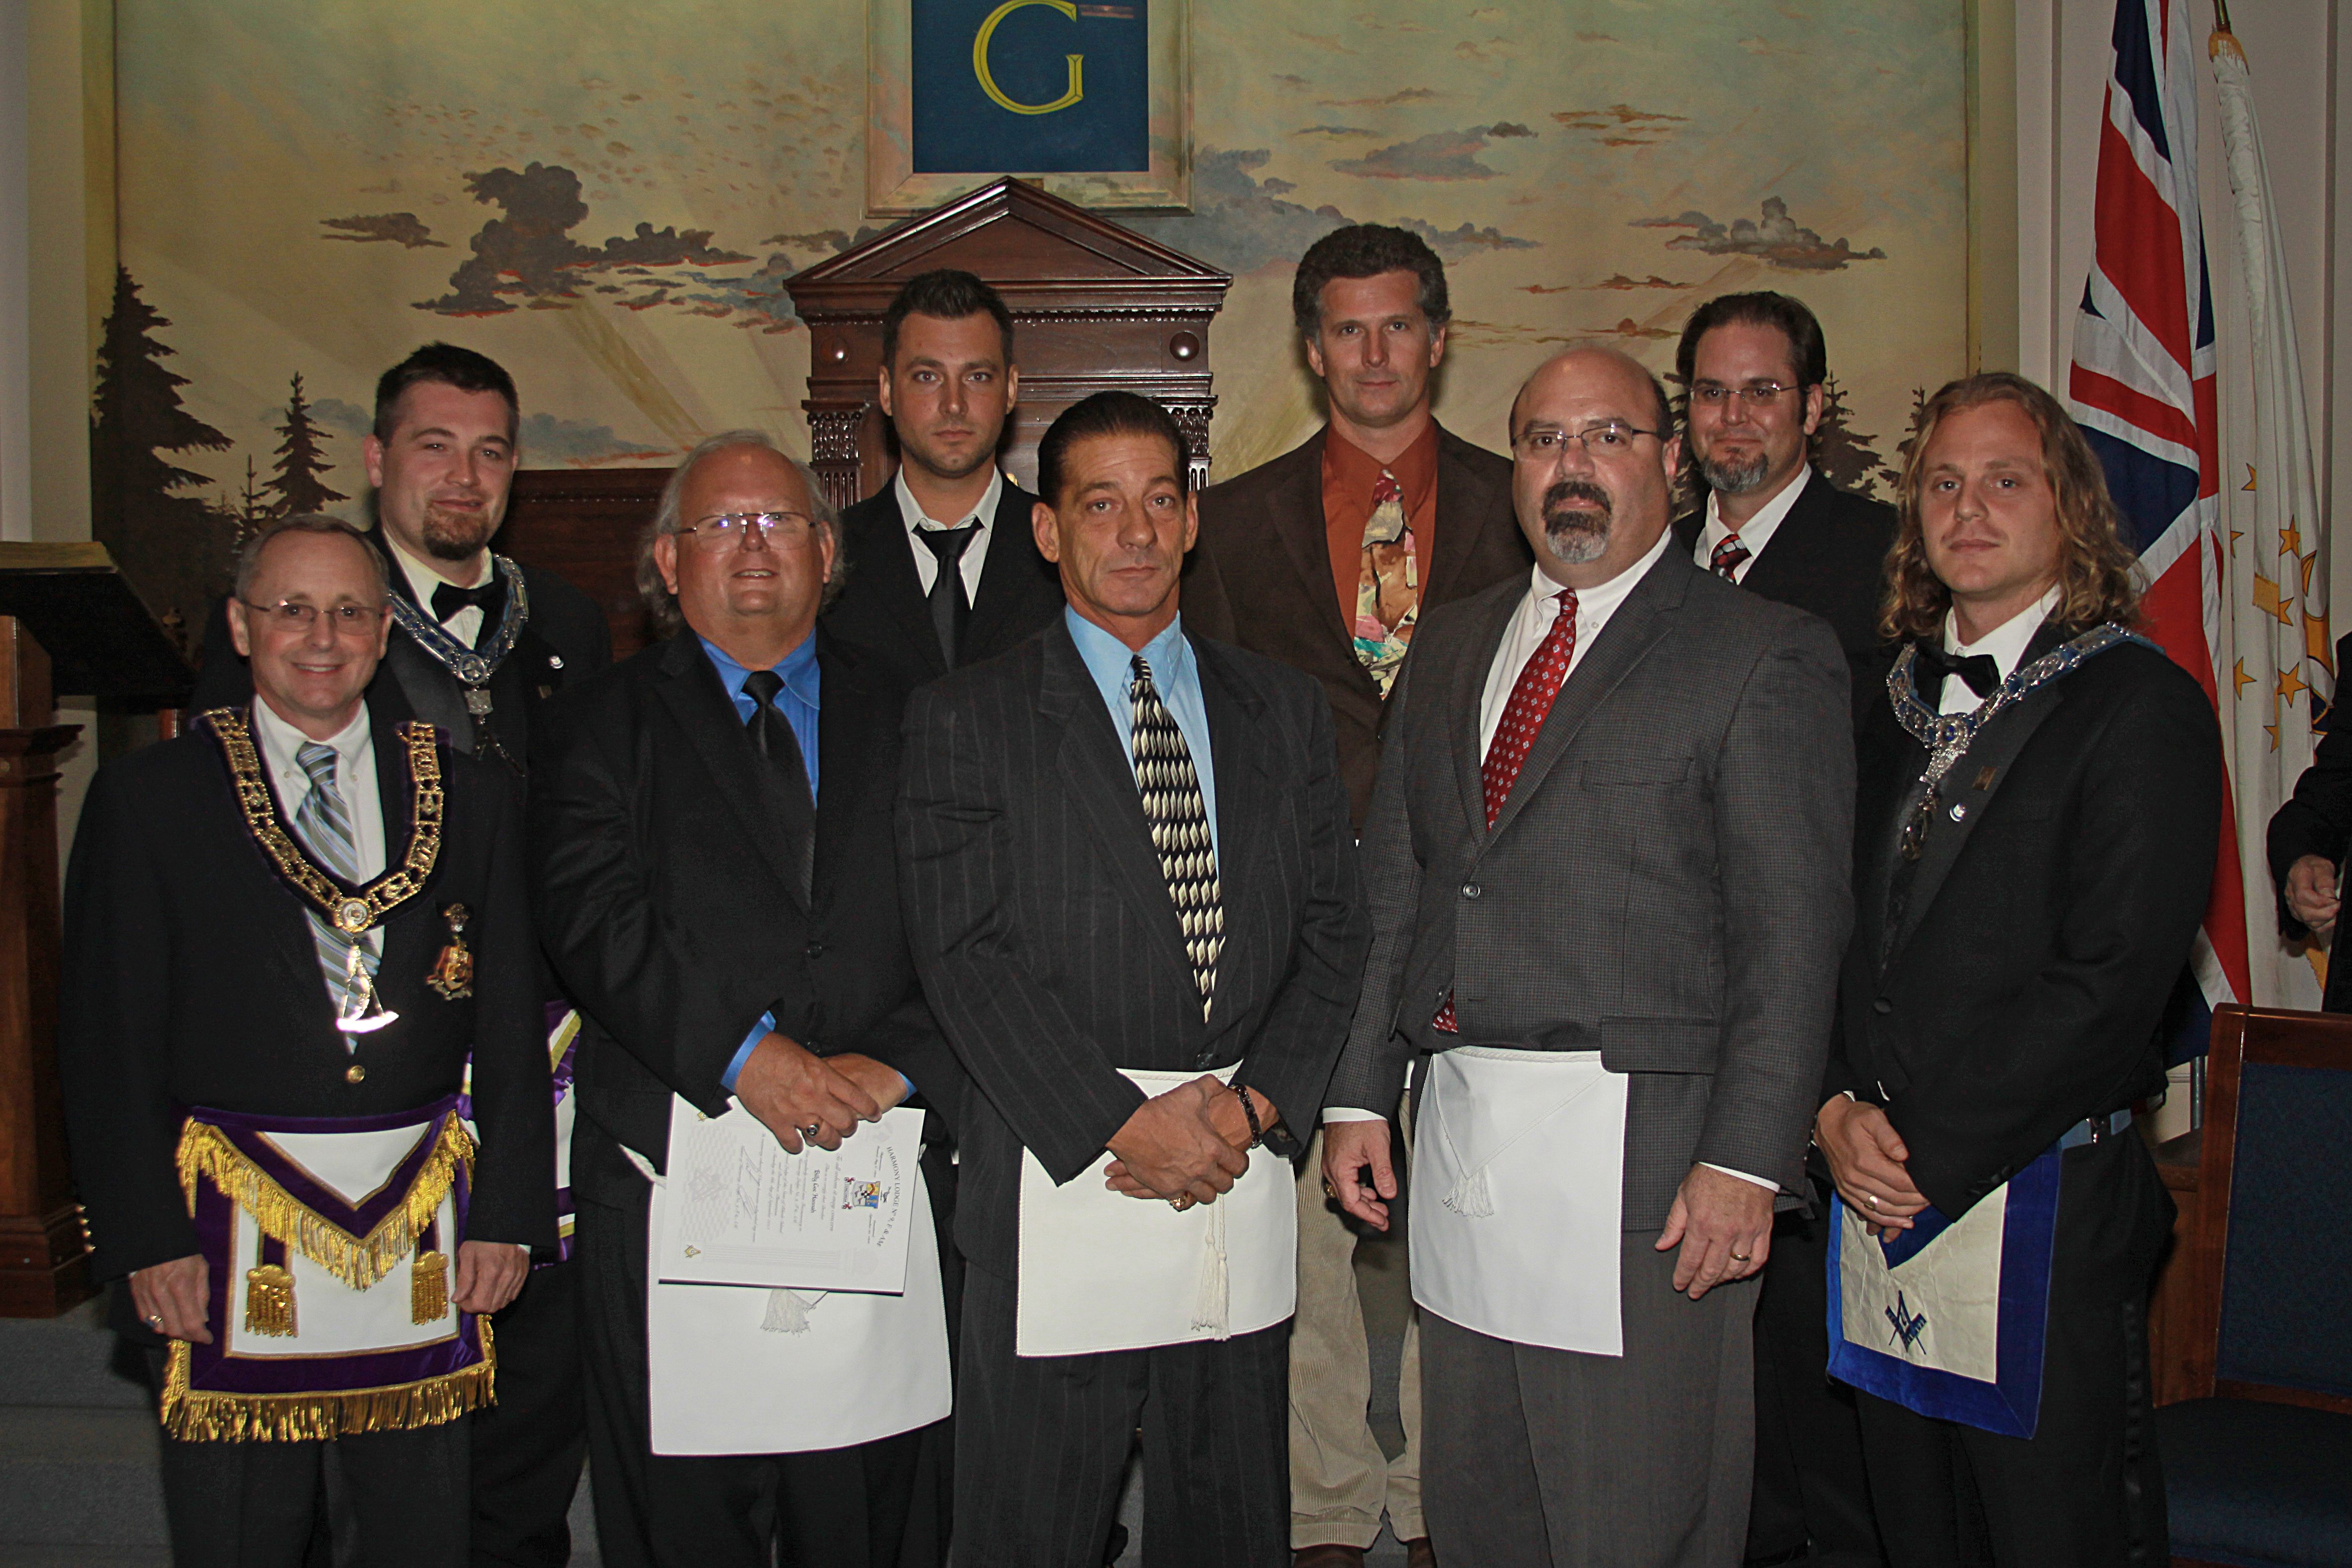 Congratulations to our newest members of Harmony Lodge #9